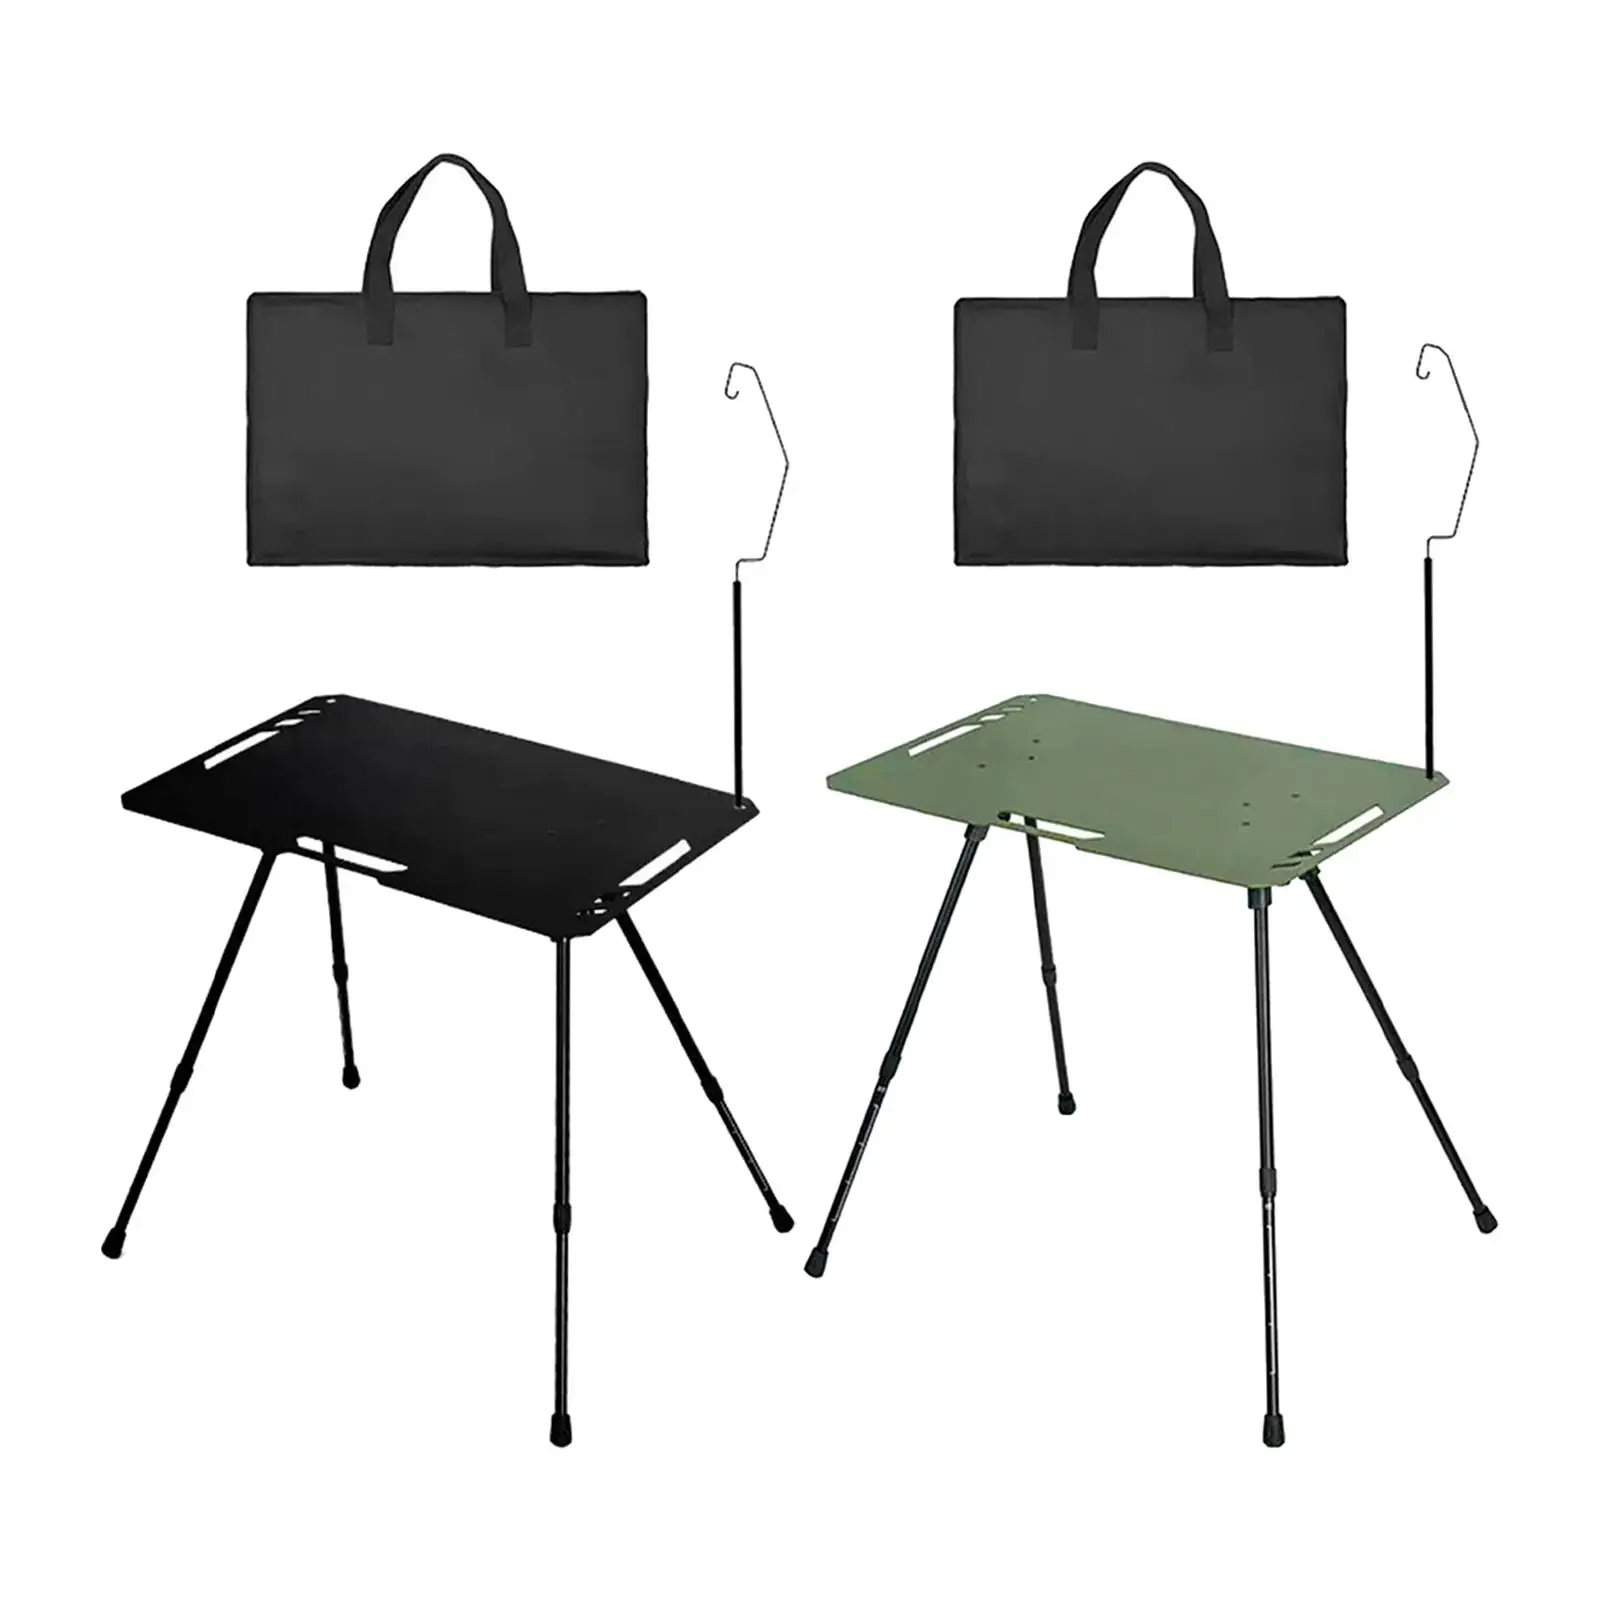 Camping Table Load 30kg Hanging Hole Lightweight Folding Table Outside Side Table for Picnic Outdoor Patio Equipment